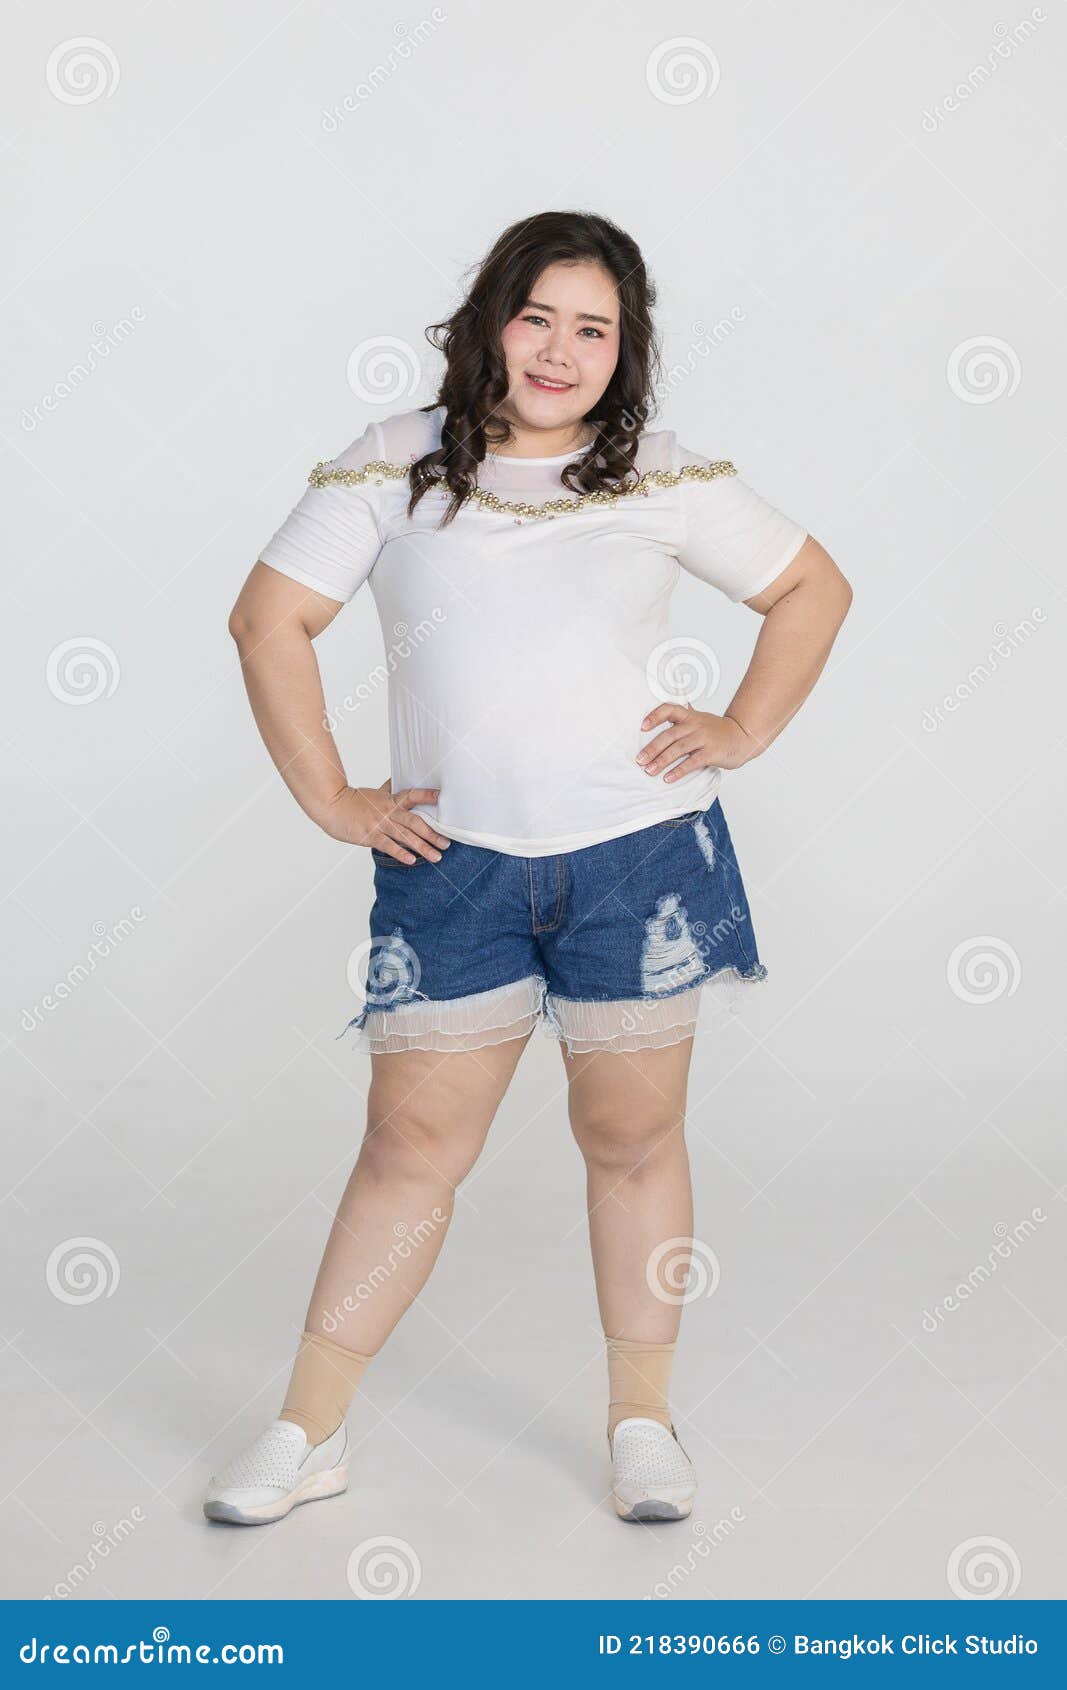 Portrait Full Body Shot of Asian Young Happy Cute Friendly Overweight Fat  Teen Long Black Hair Female Wears White Shirt and Short Stock Photo - Image  of blue, background: 218390666